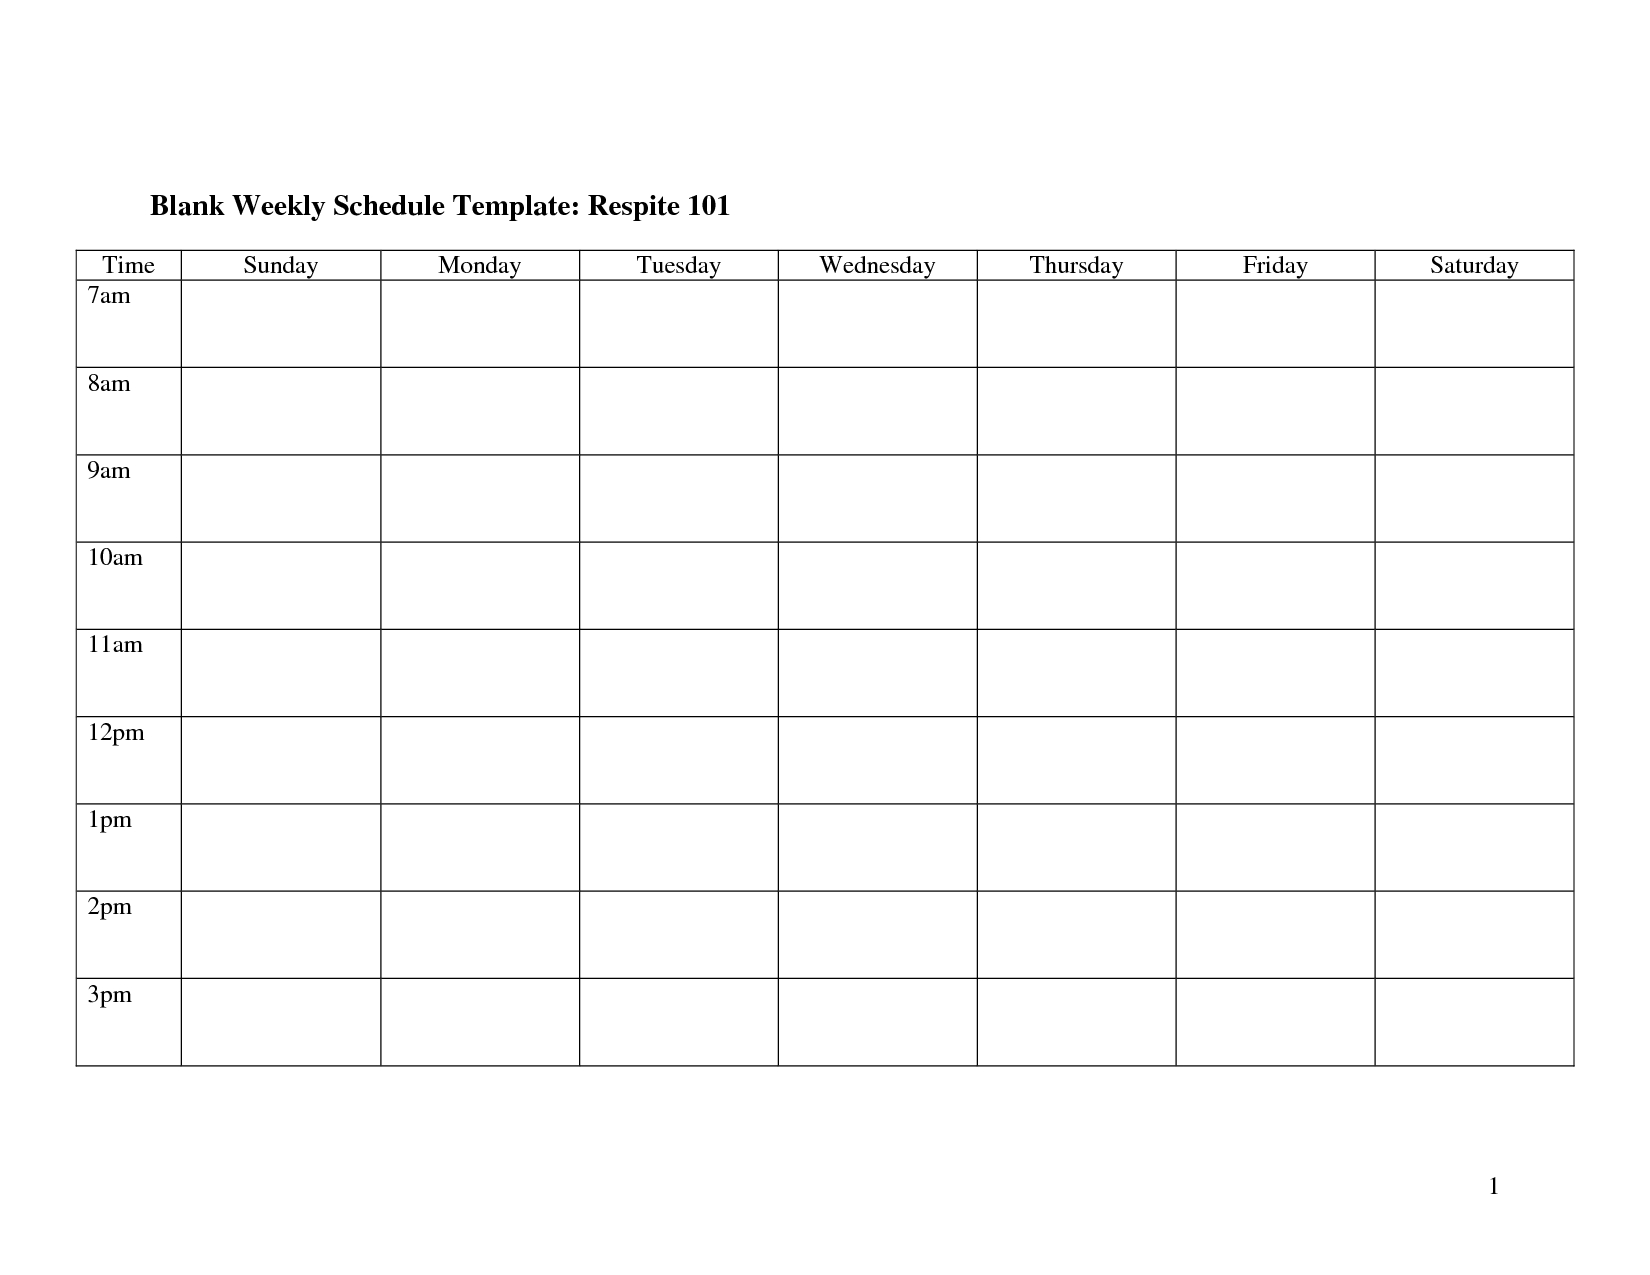 15 Blank Schedule Template Images – Blank Weekly Work With Blank Revision Timetable Template